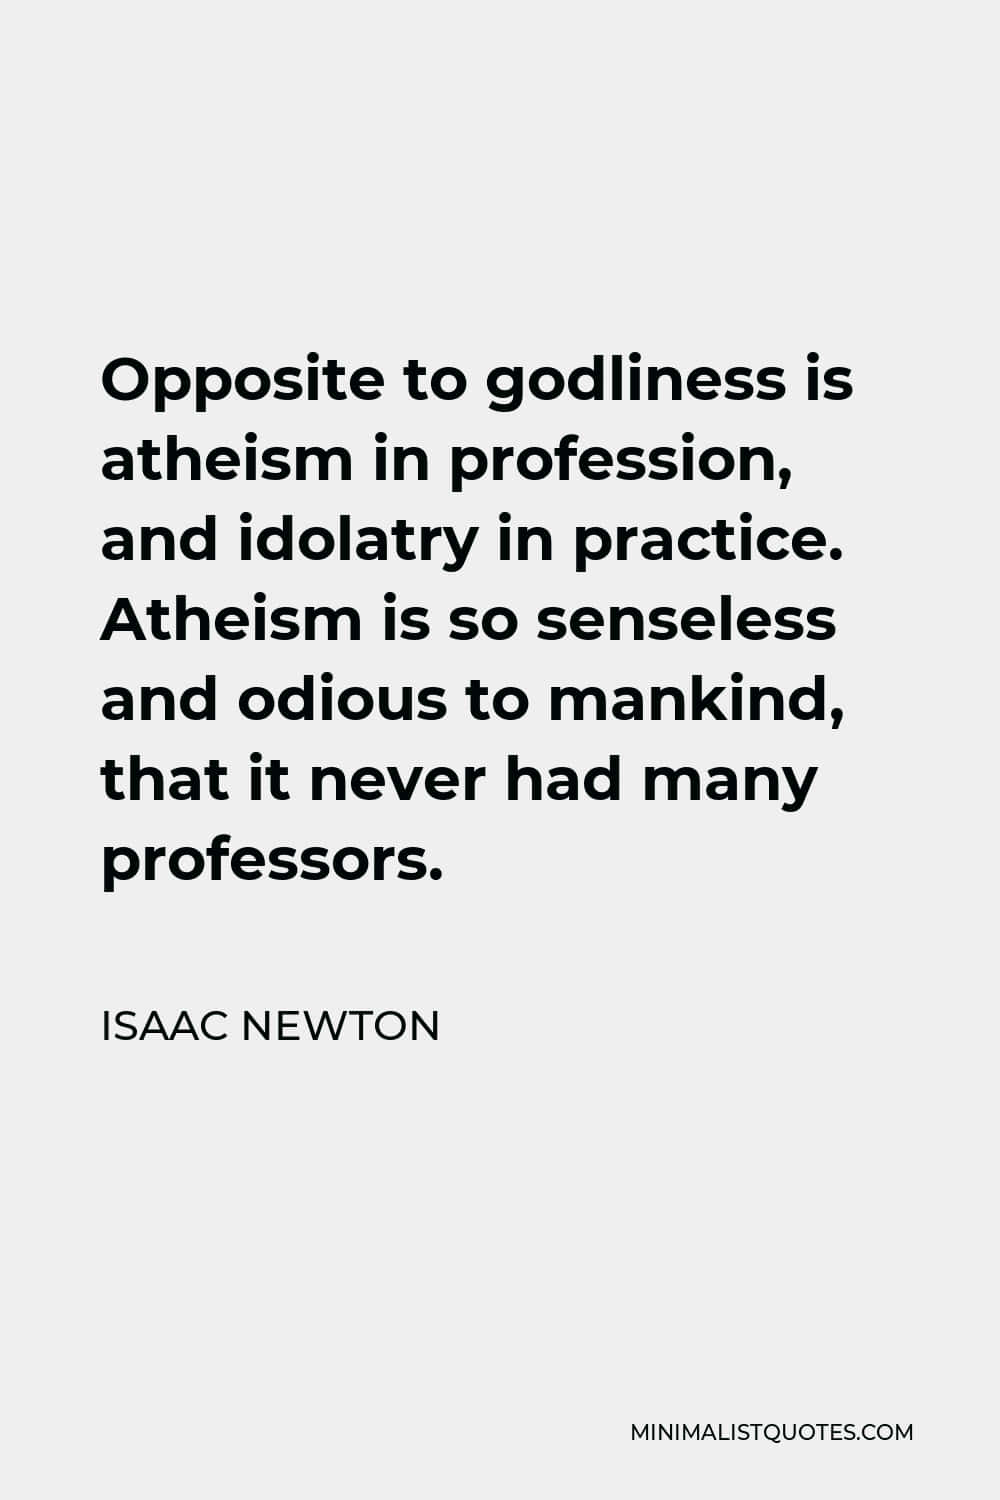 Atheism Is Odious Isaac Newton Quote Wallpaper